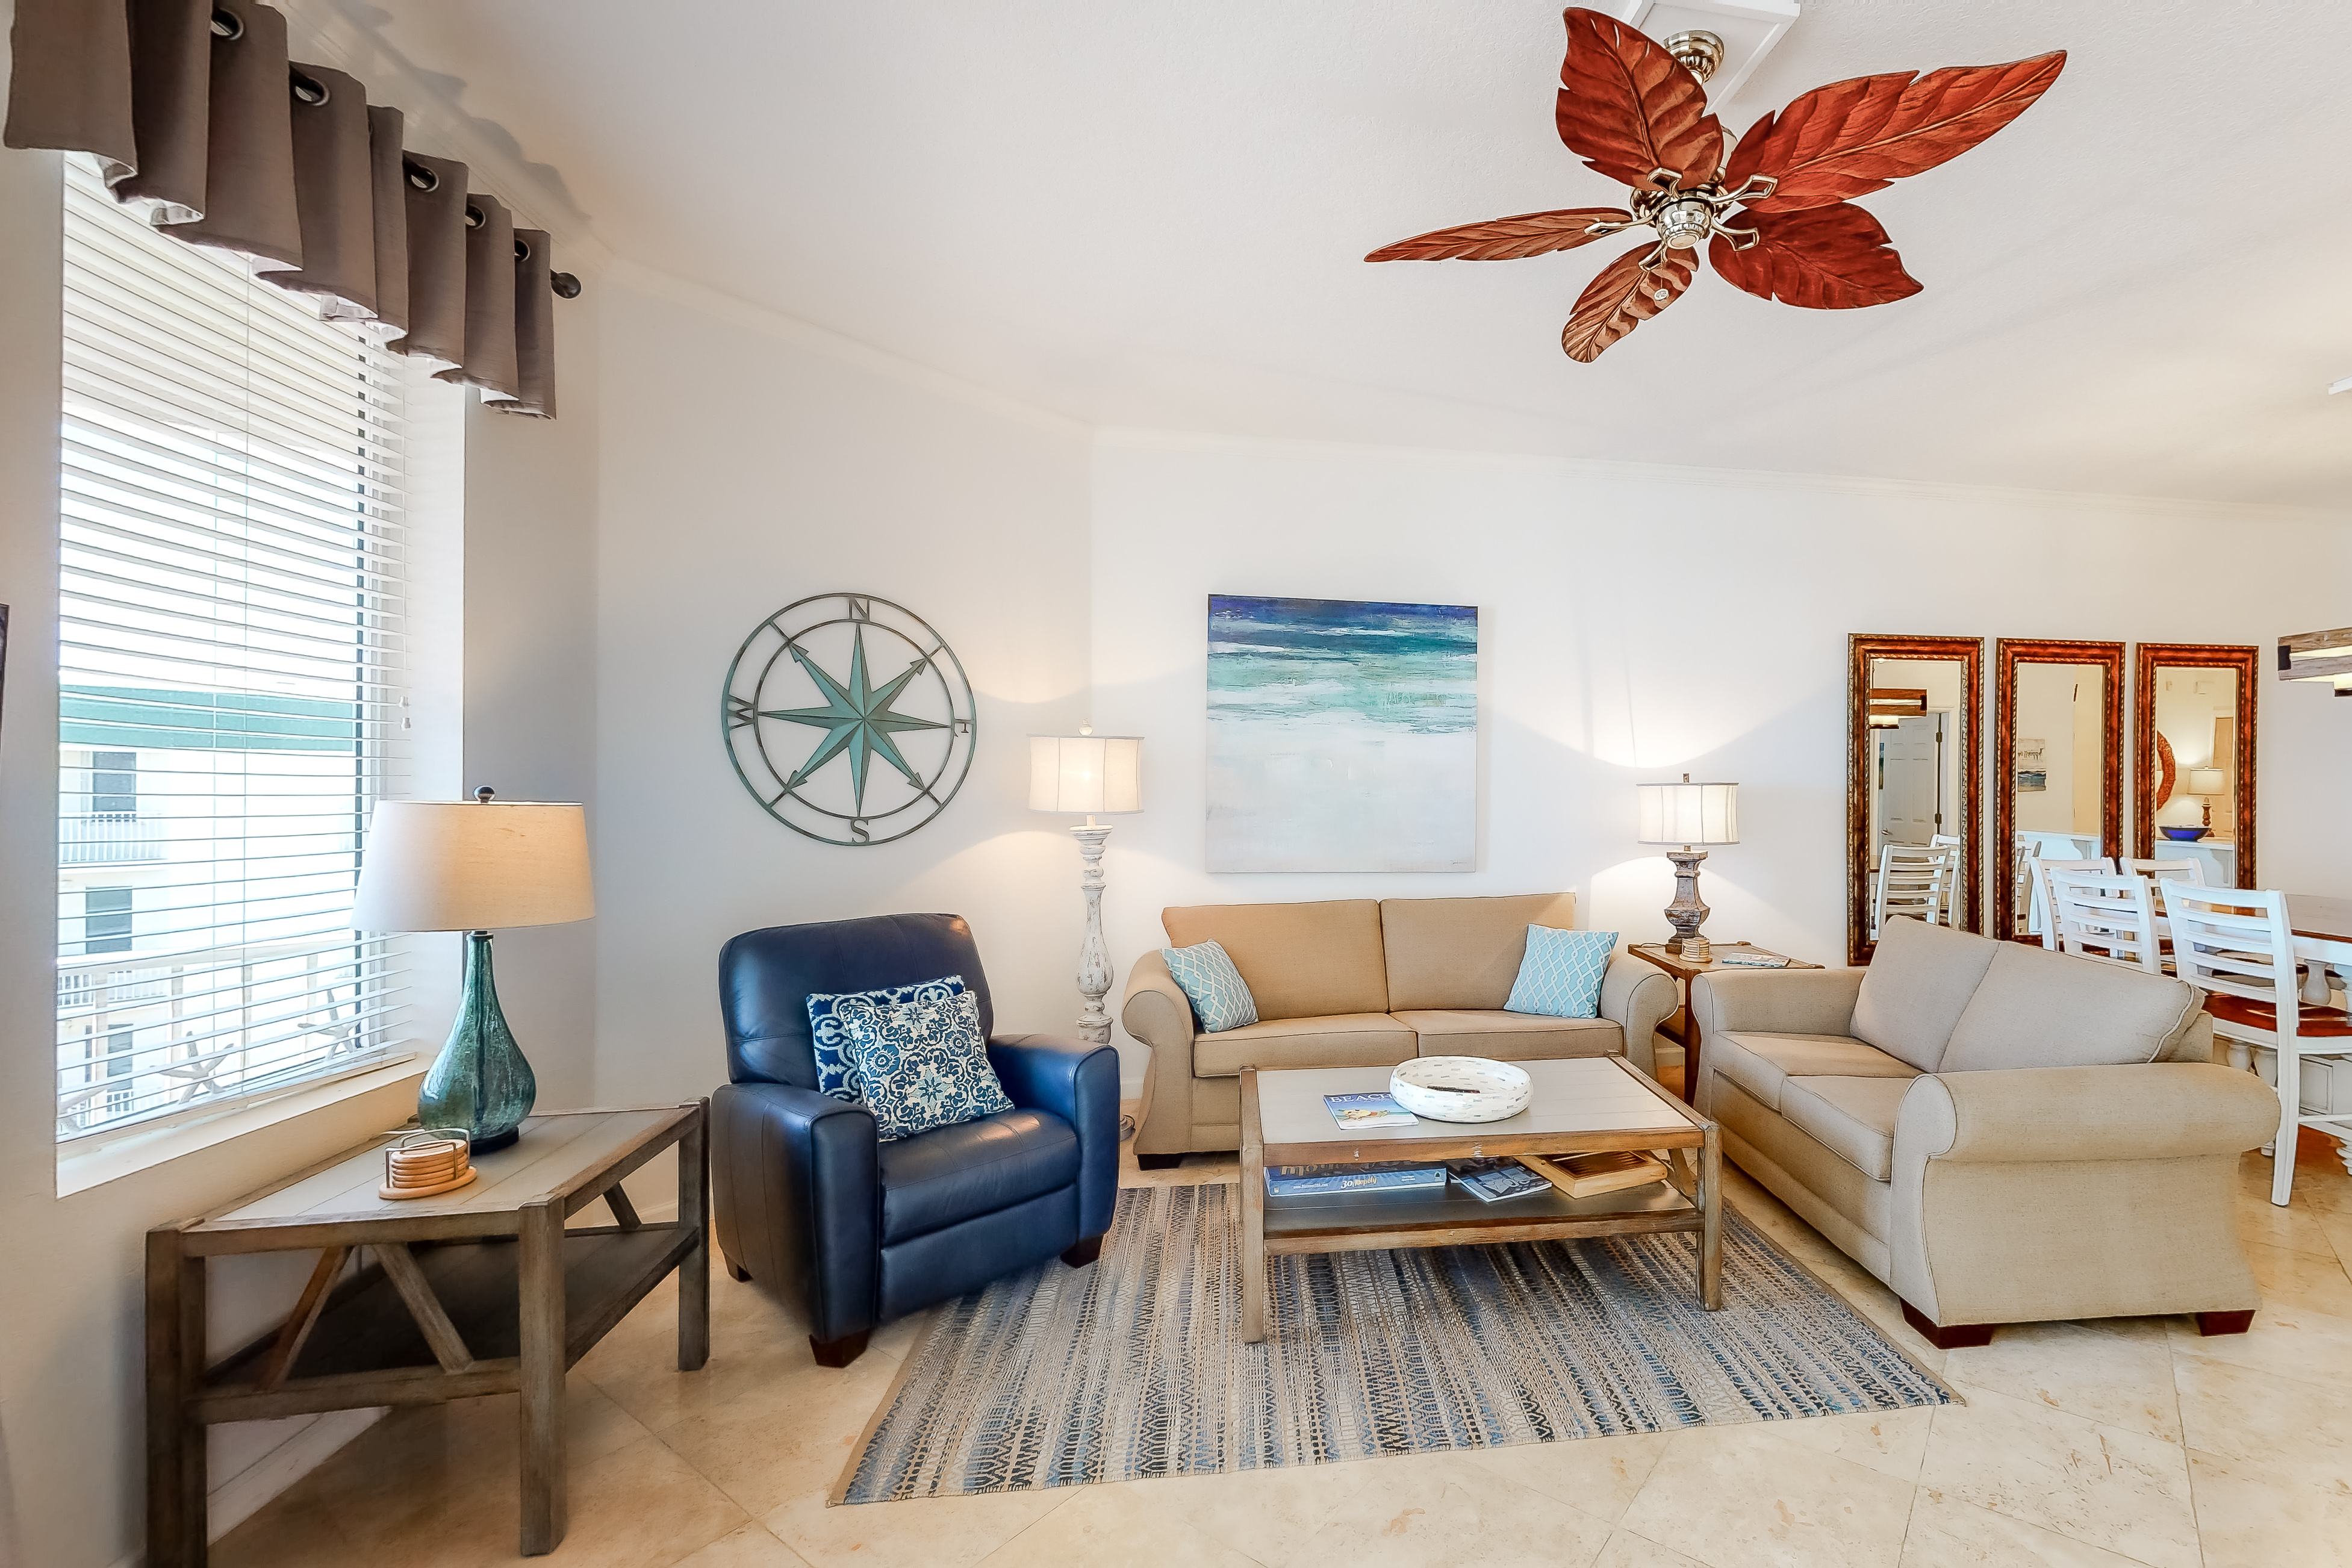 Dunes of Seagrove A408 Condo rental in Dunes of Seagrove in Highway 30-A Florida - #2